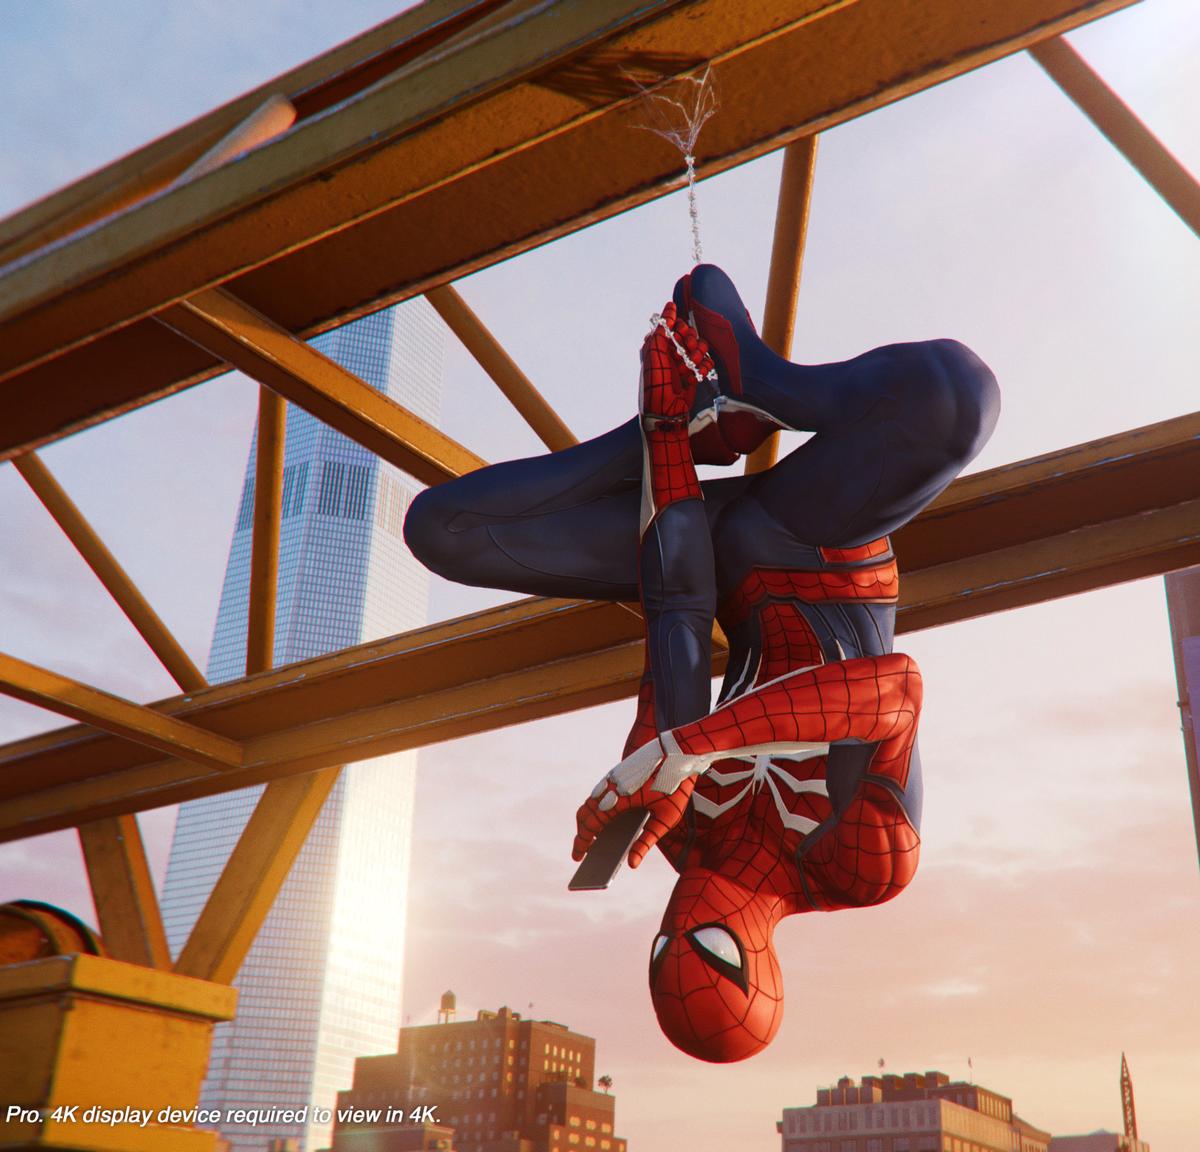 Latter Blodig Tæt Spider-Man PS4 Review: Gameplay Impressions, Speedrunning Tips and Appeal |  News, Scores, Highlights, Stats, and Rumors | Bleacher Report